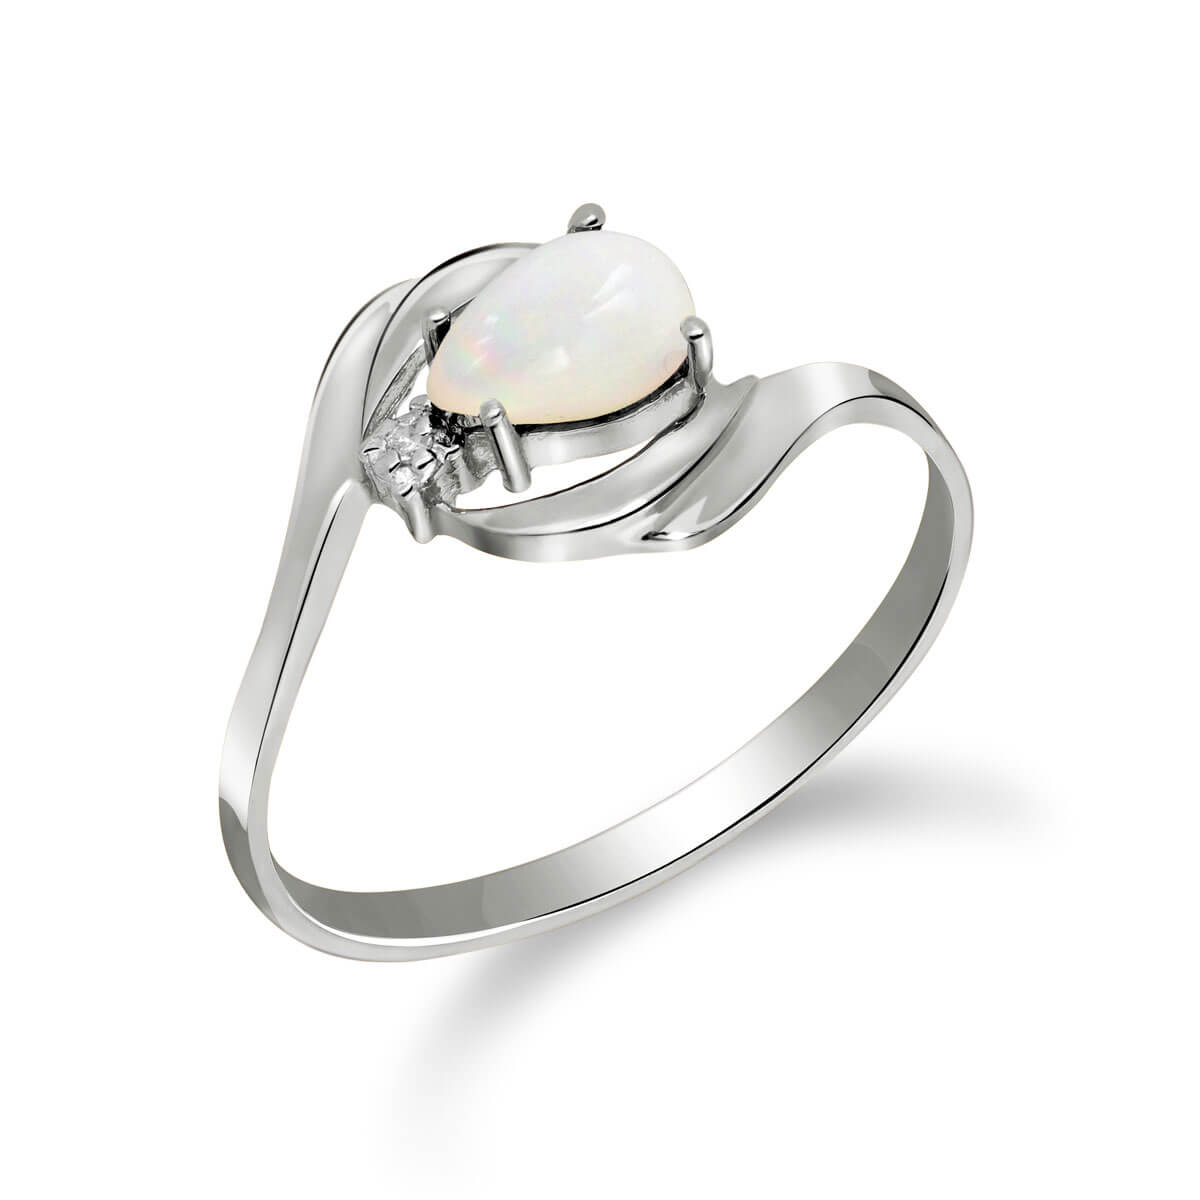 Opal & Diamond Flare Ring in 9ct White Gold